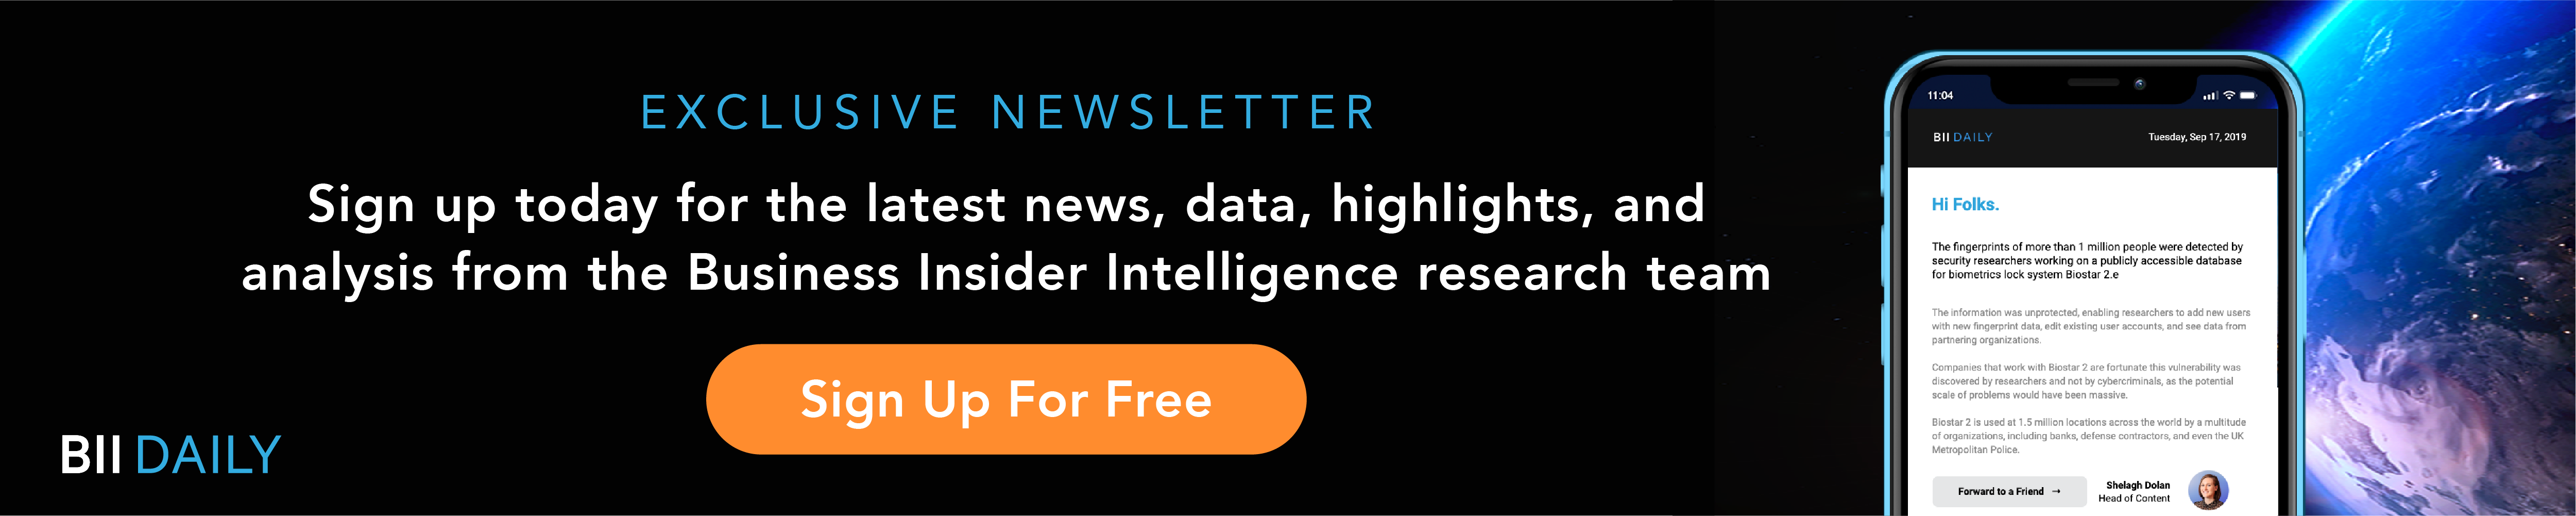 Signup Today: Free Daily Newsletter from Business Insider Intelligence